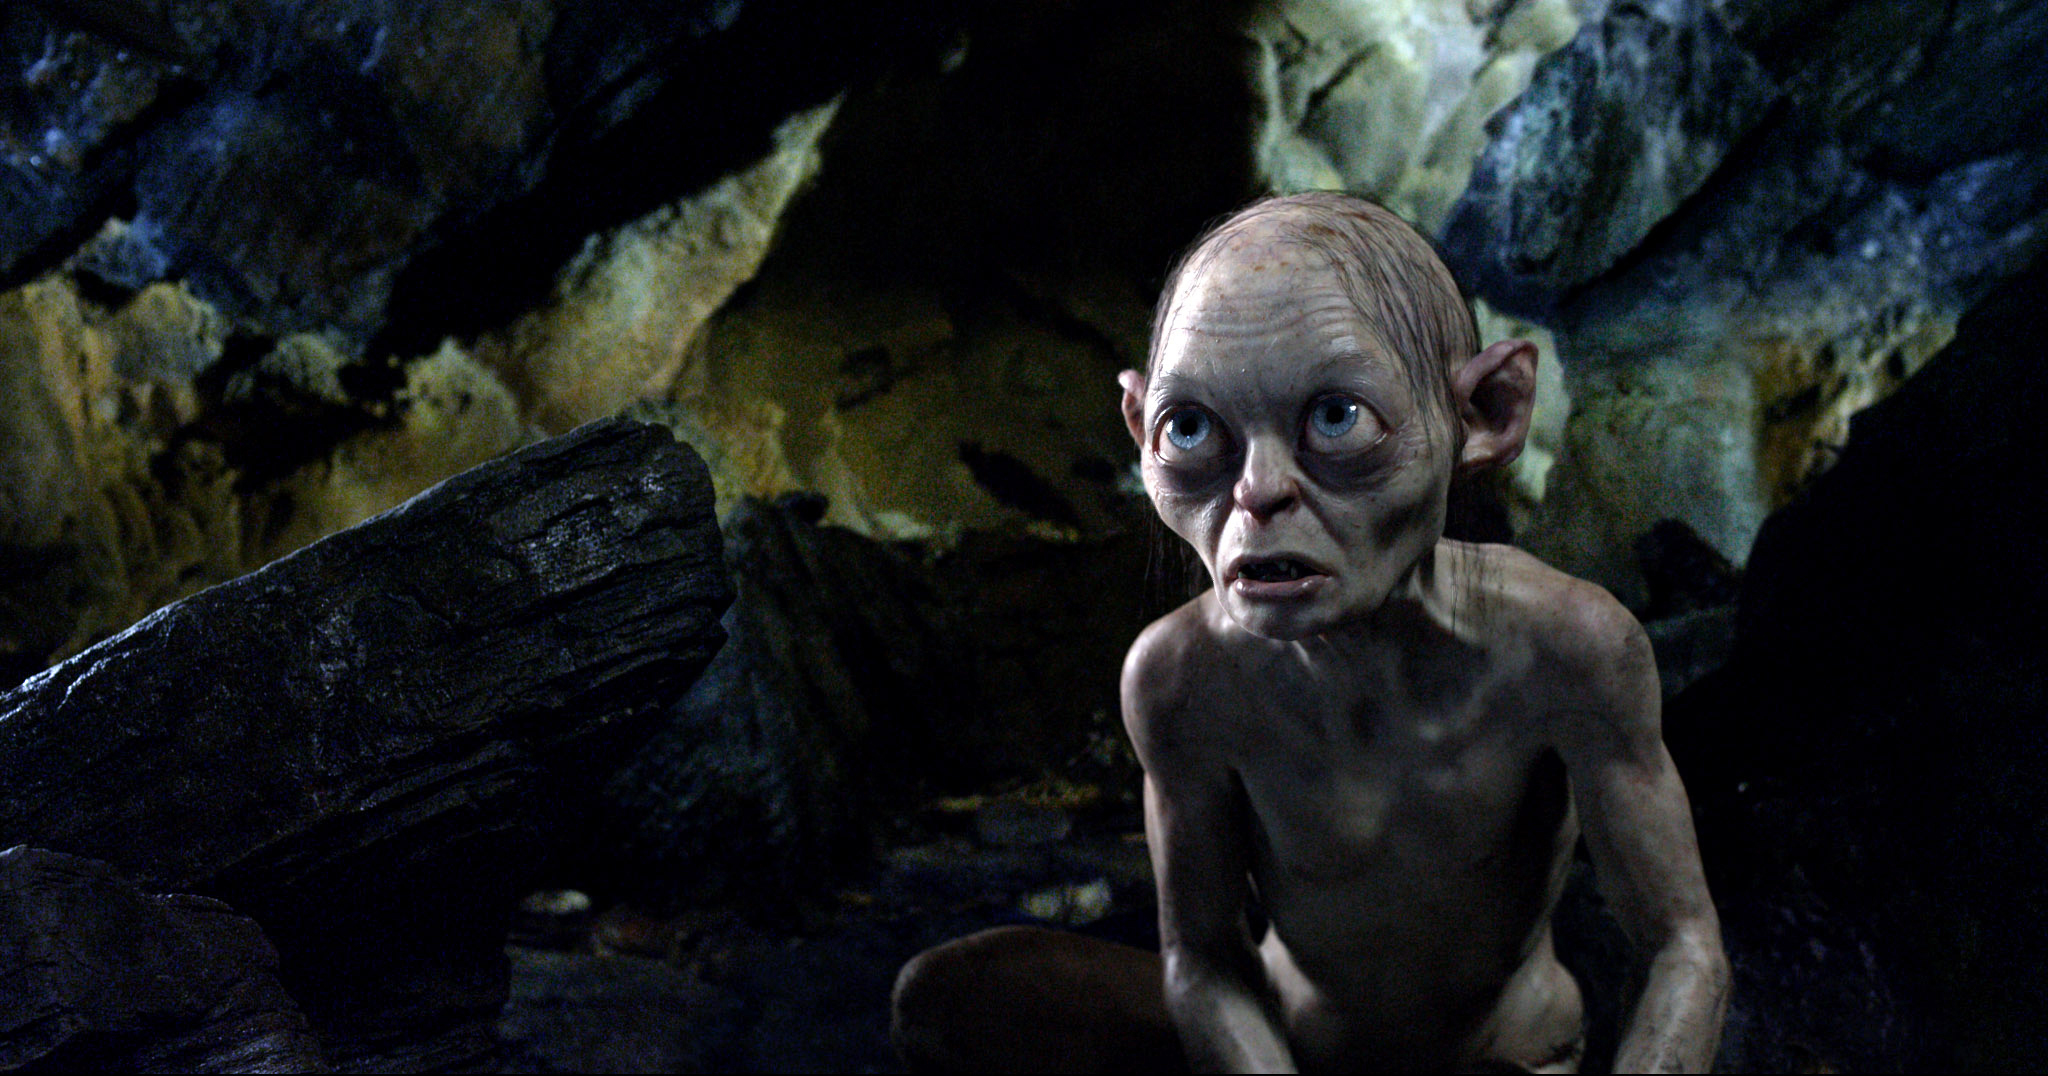 PHOTO: The character Gollum is shown in a scene from the fim "The Hobbit: An Unexpected Journey."